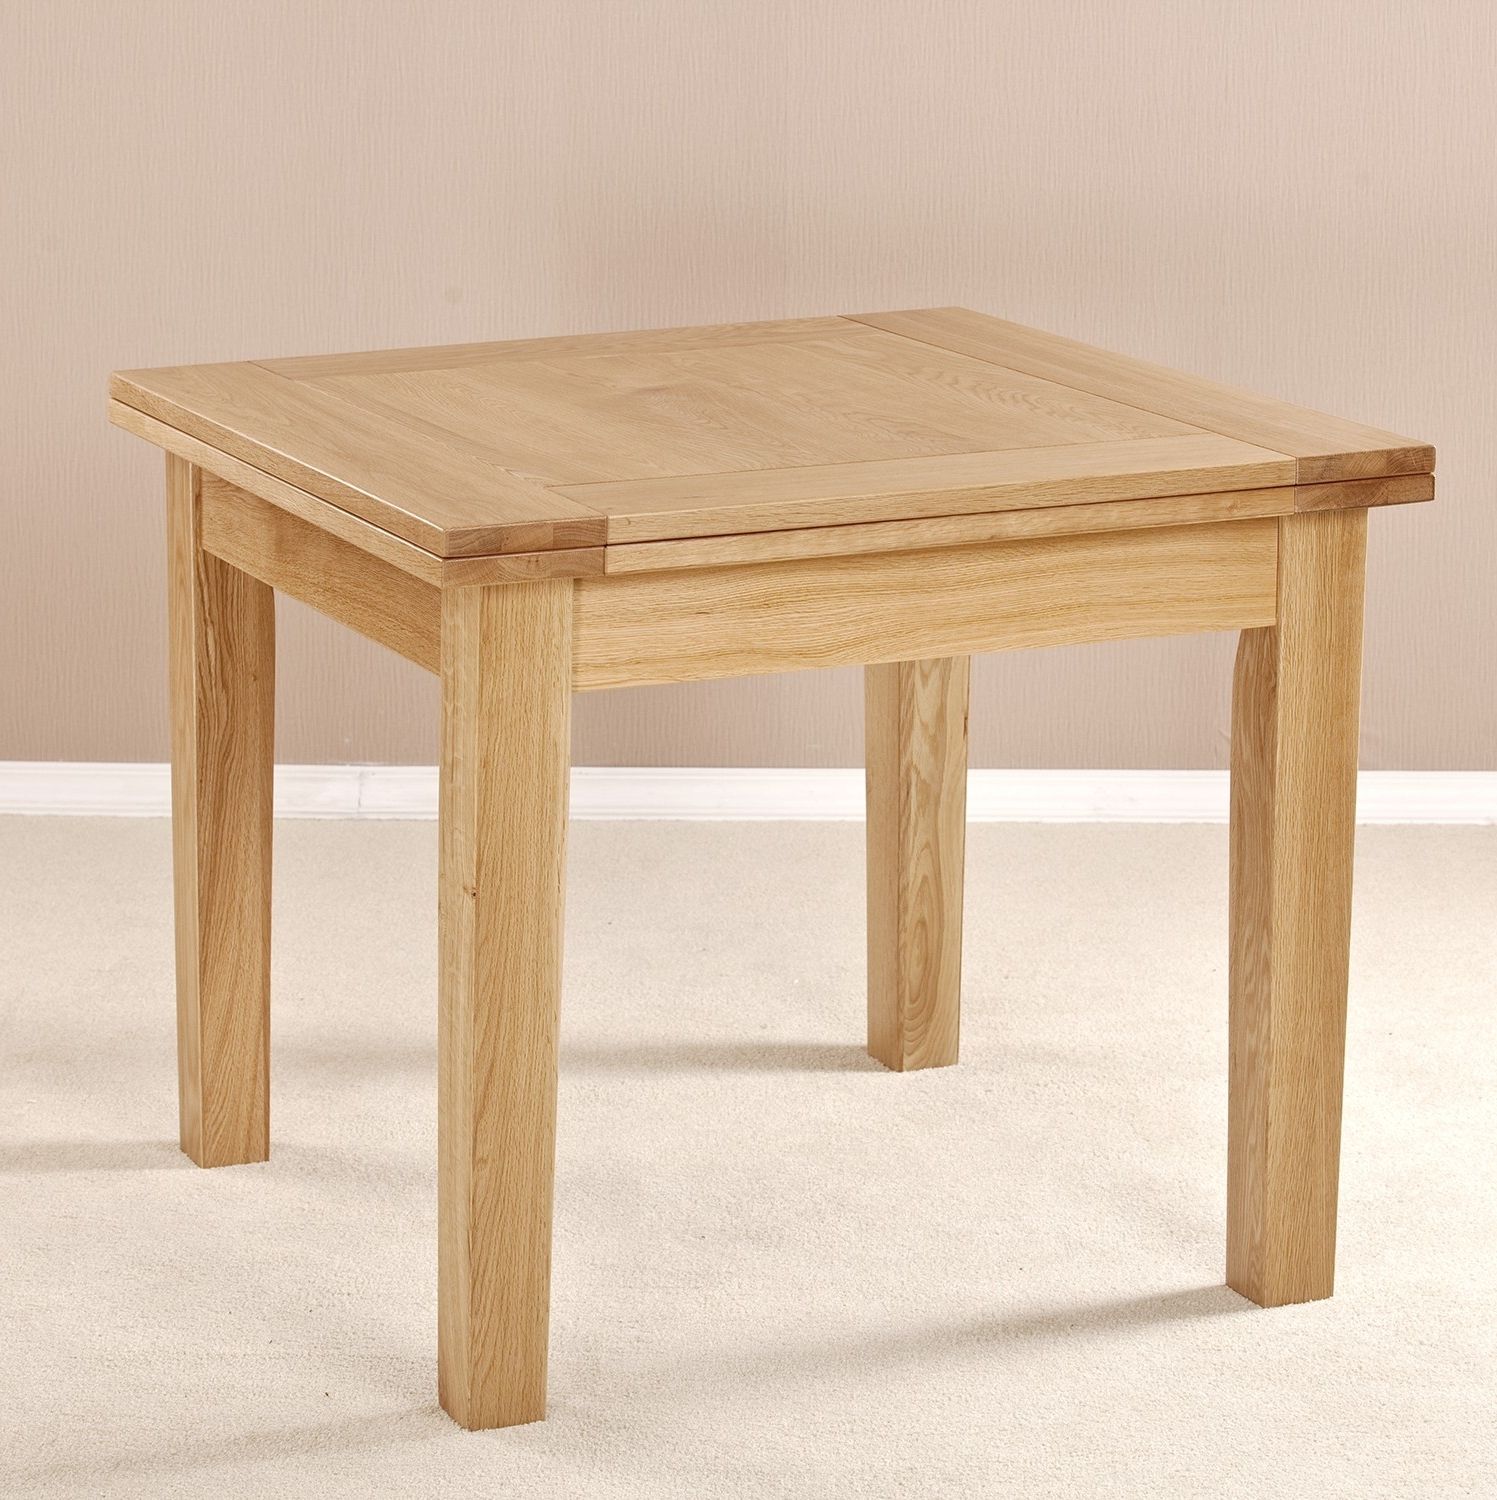 Square Solid Oak Wood Flip Top Extendable Dining Table Design With Within Well Liked Square Extendable Dining Tables (View 1 of 25)